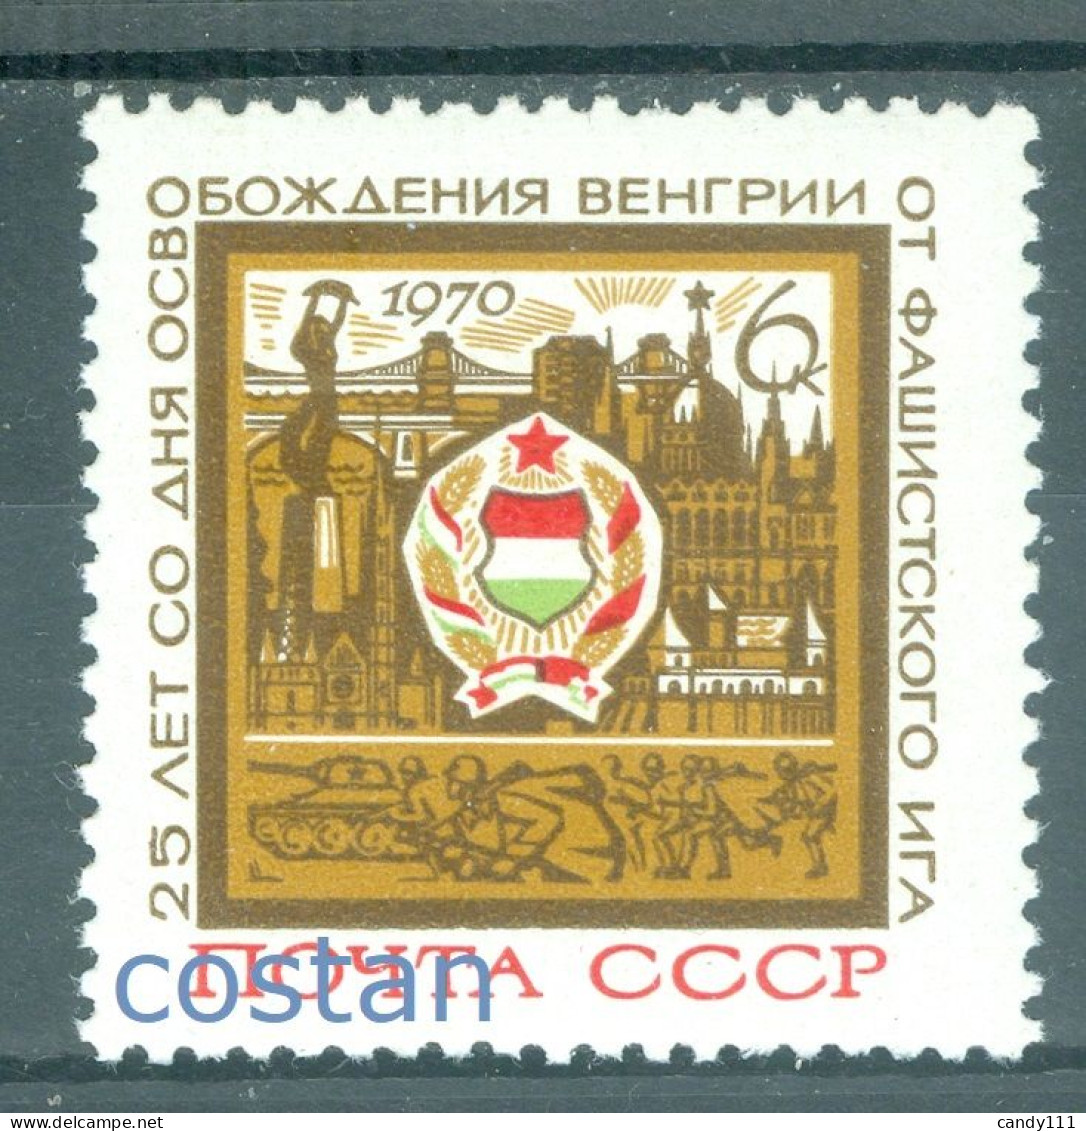 1970 Hungary Liberation,Coat Of Arms,tank,soldiers,Parliament,Russia,3747,MNH - Neufs